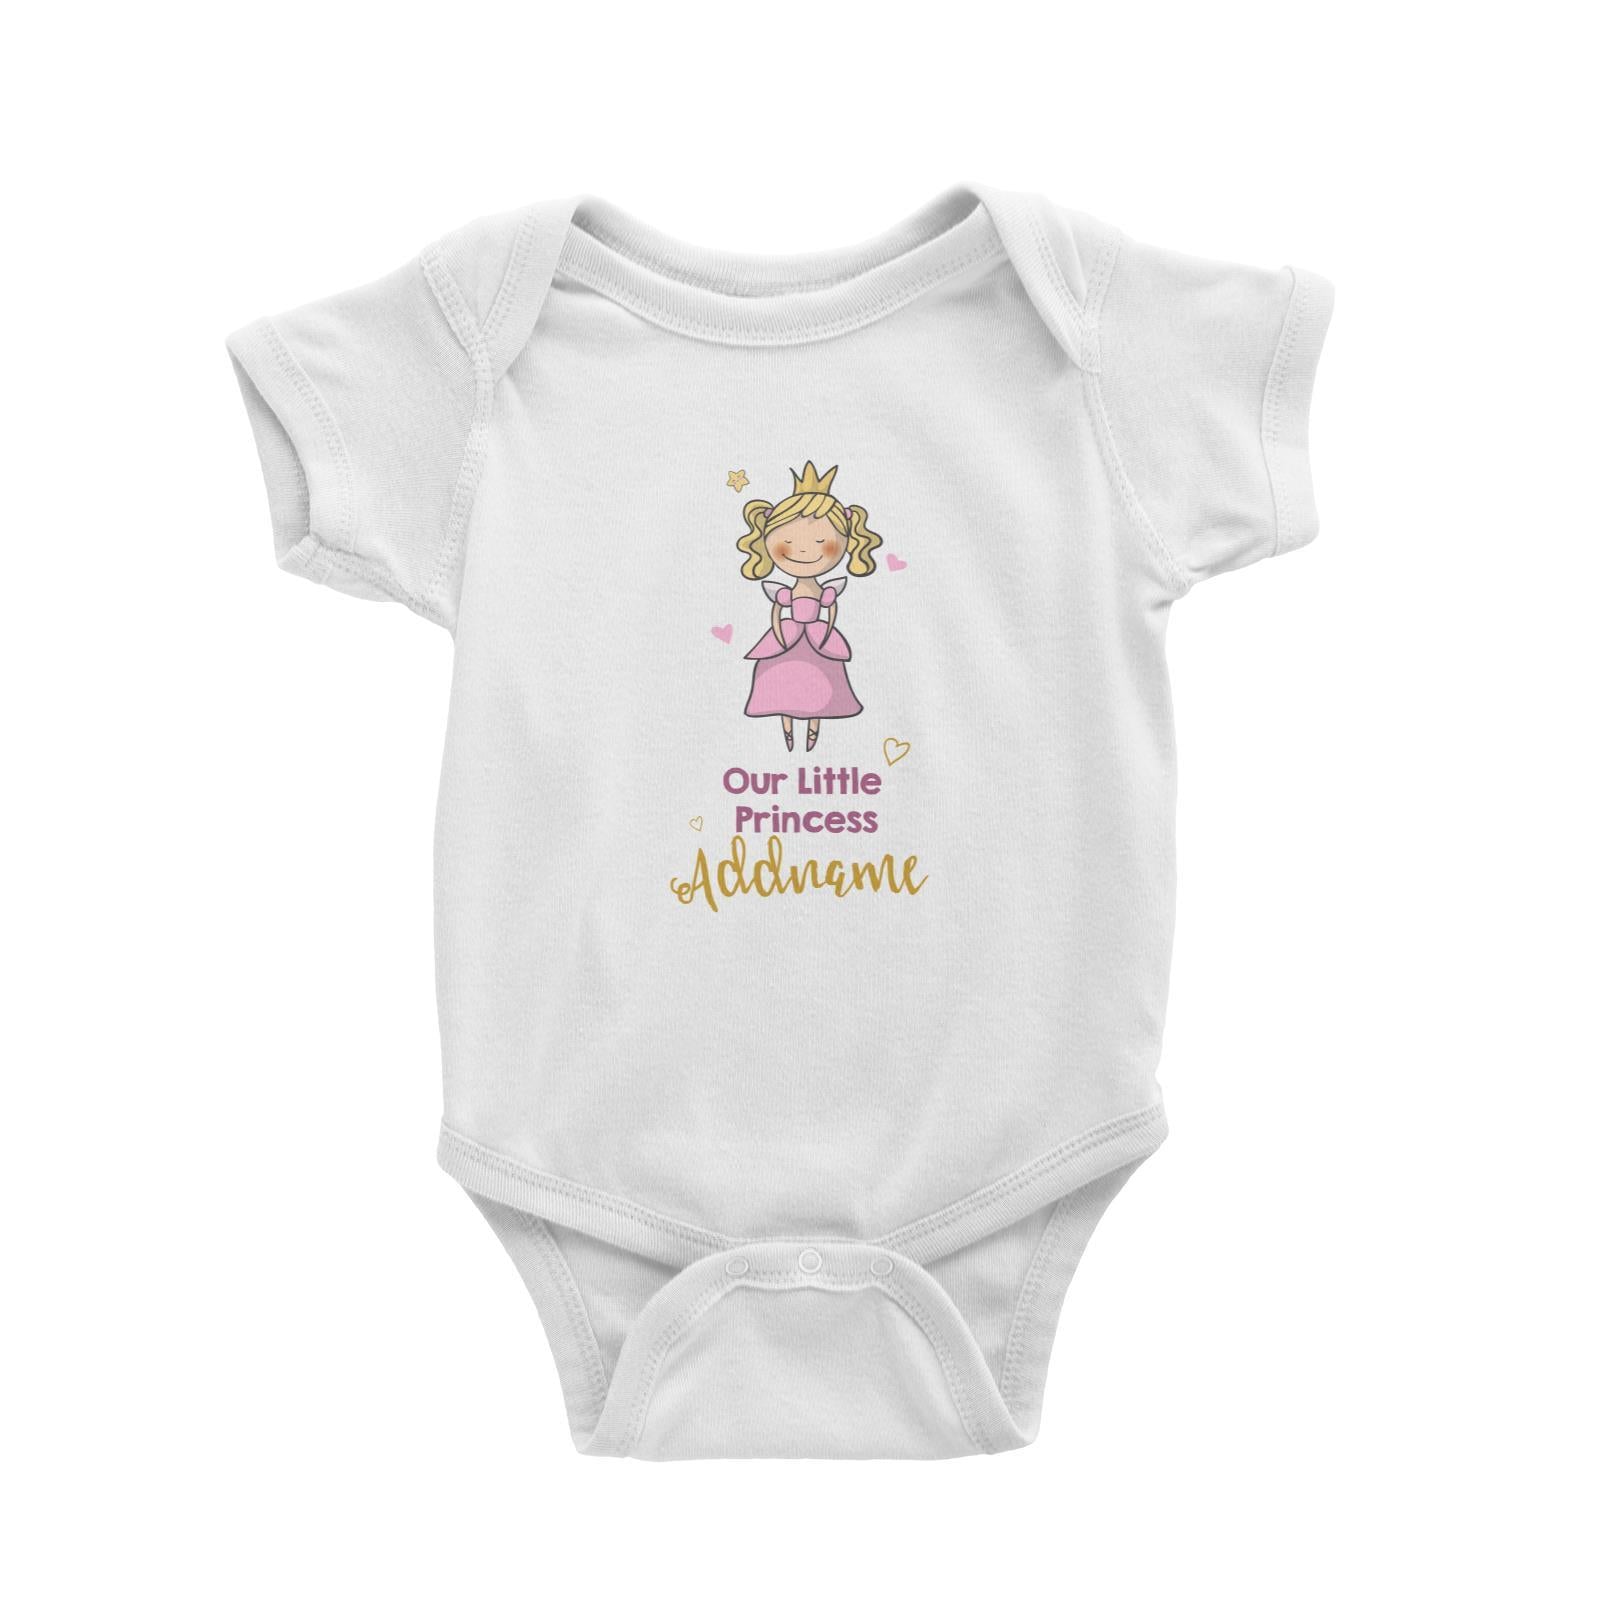 Our Little Princess in Pink Dress with Addname Baby Romper